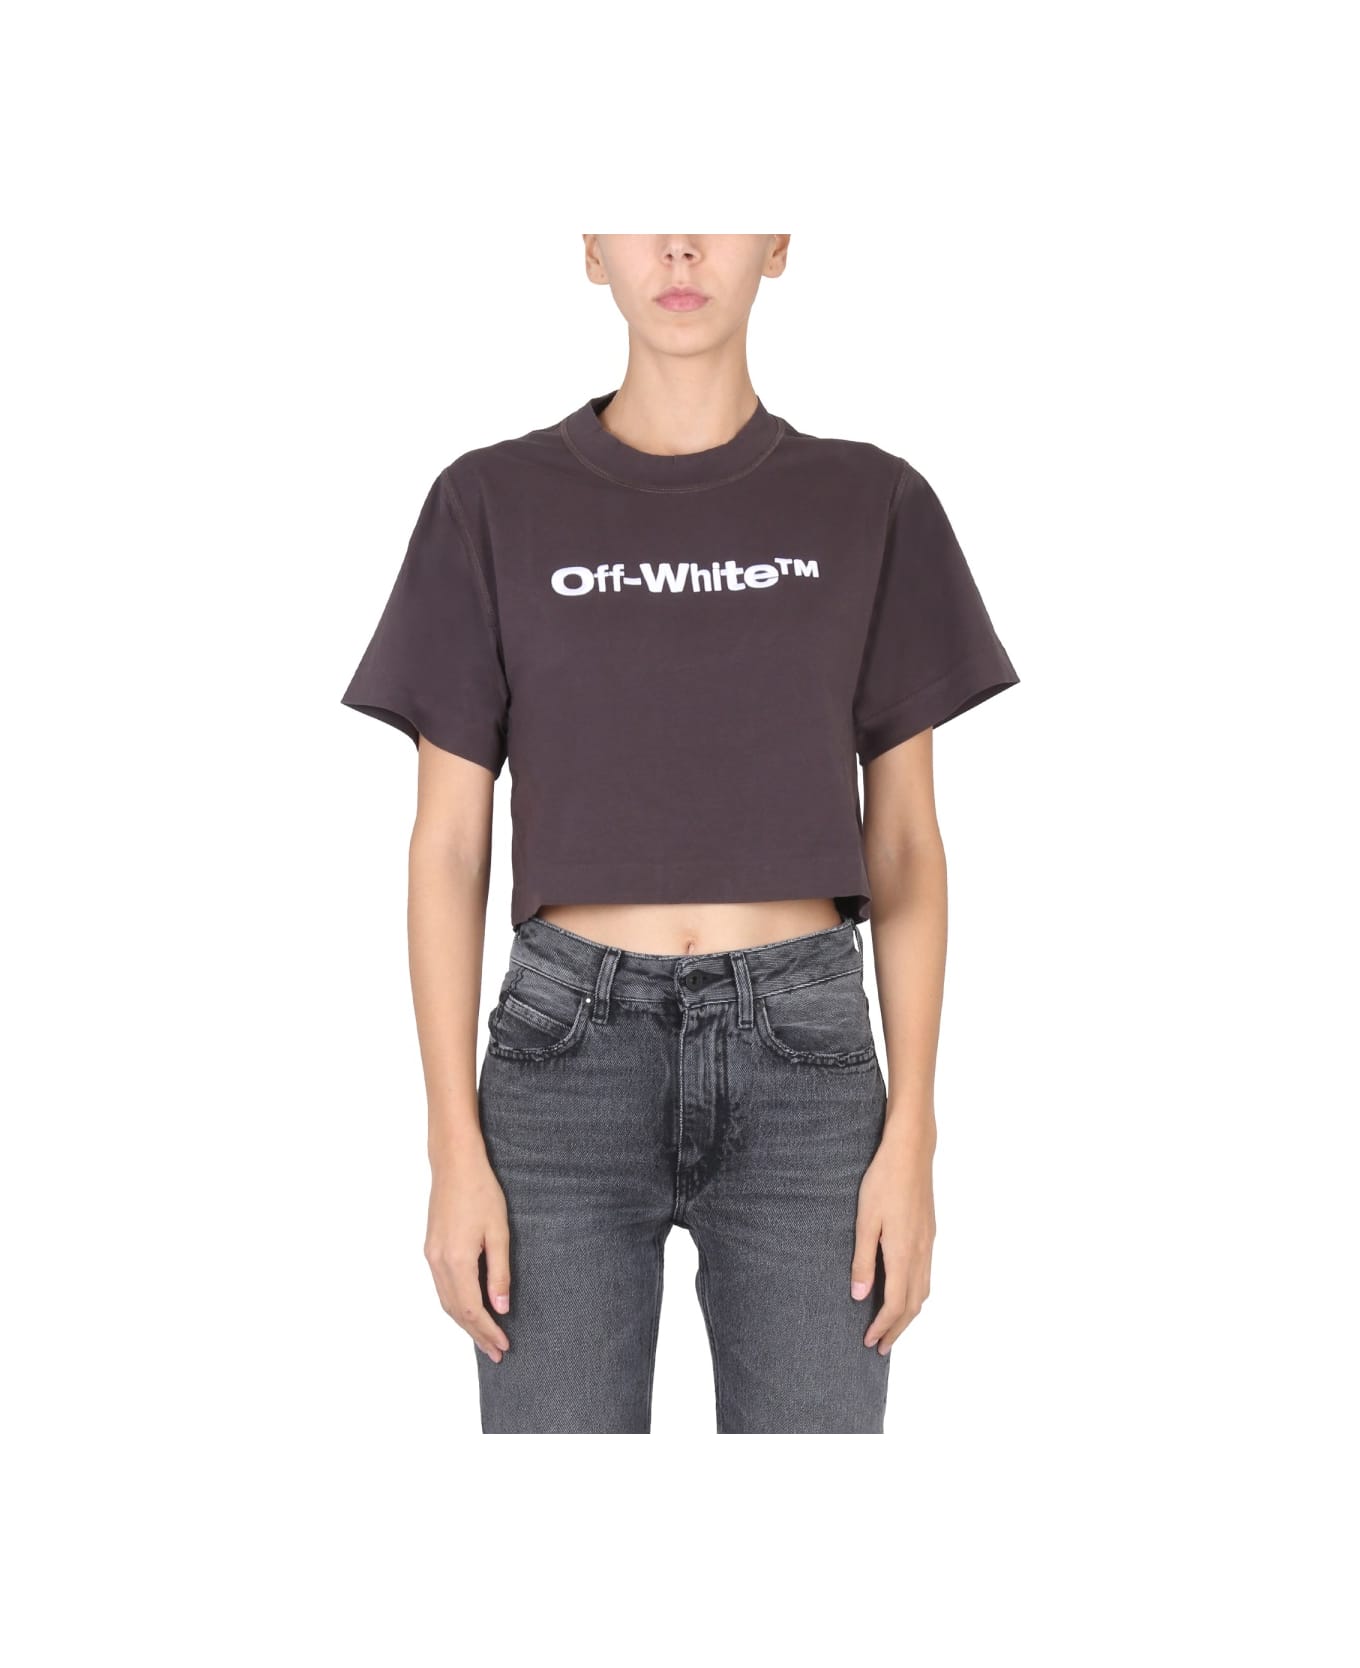 Off-White Cropped Fit T-shirt - GREY